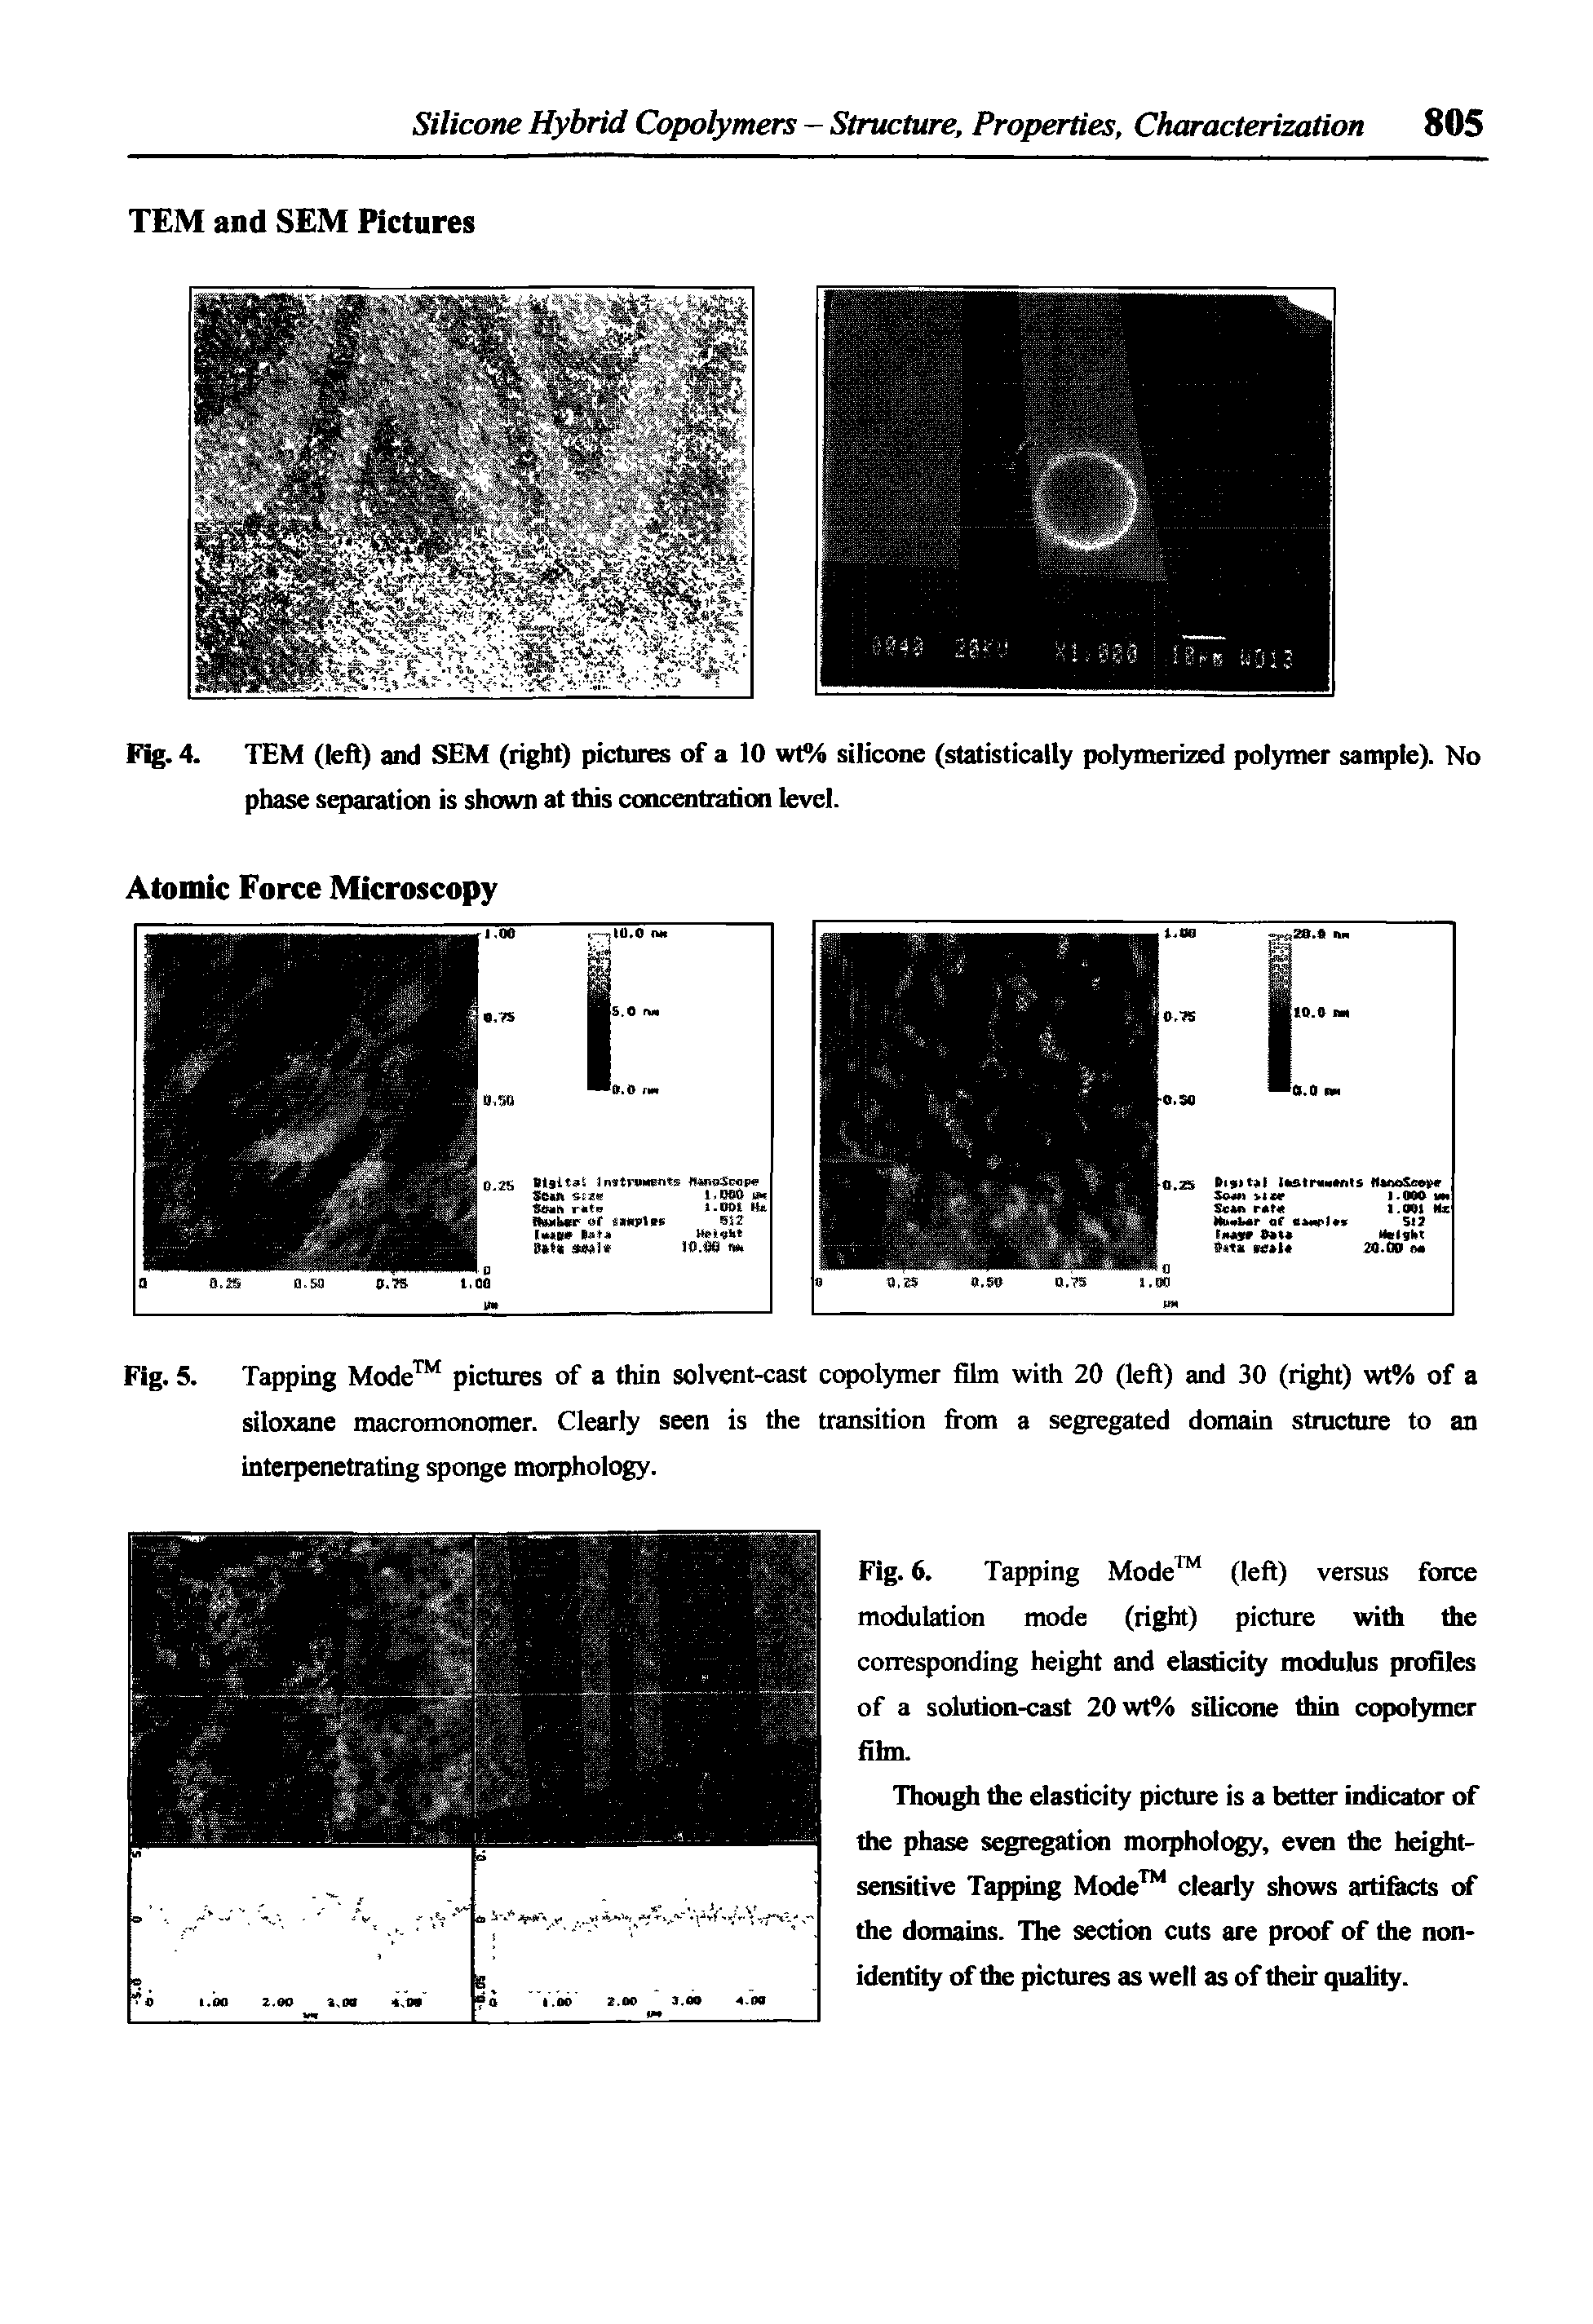 Fig. 5. Tapping Mode pictures of a thin solvent-cast copolymer film with 20 (left) and 30 (right) wt% of a siloxane macromonomer. Clearly seen is the transition fi om a segregated domain stmeture to an interpenetrating sponge morphology.